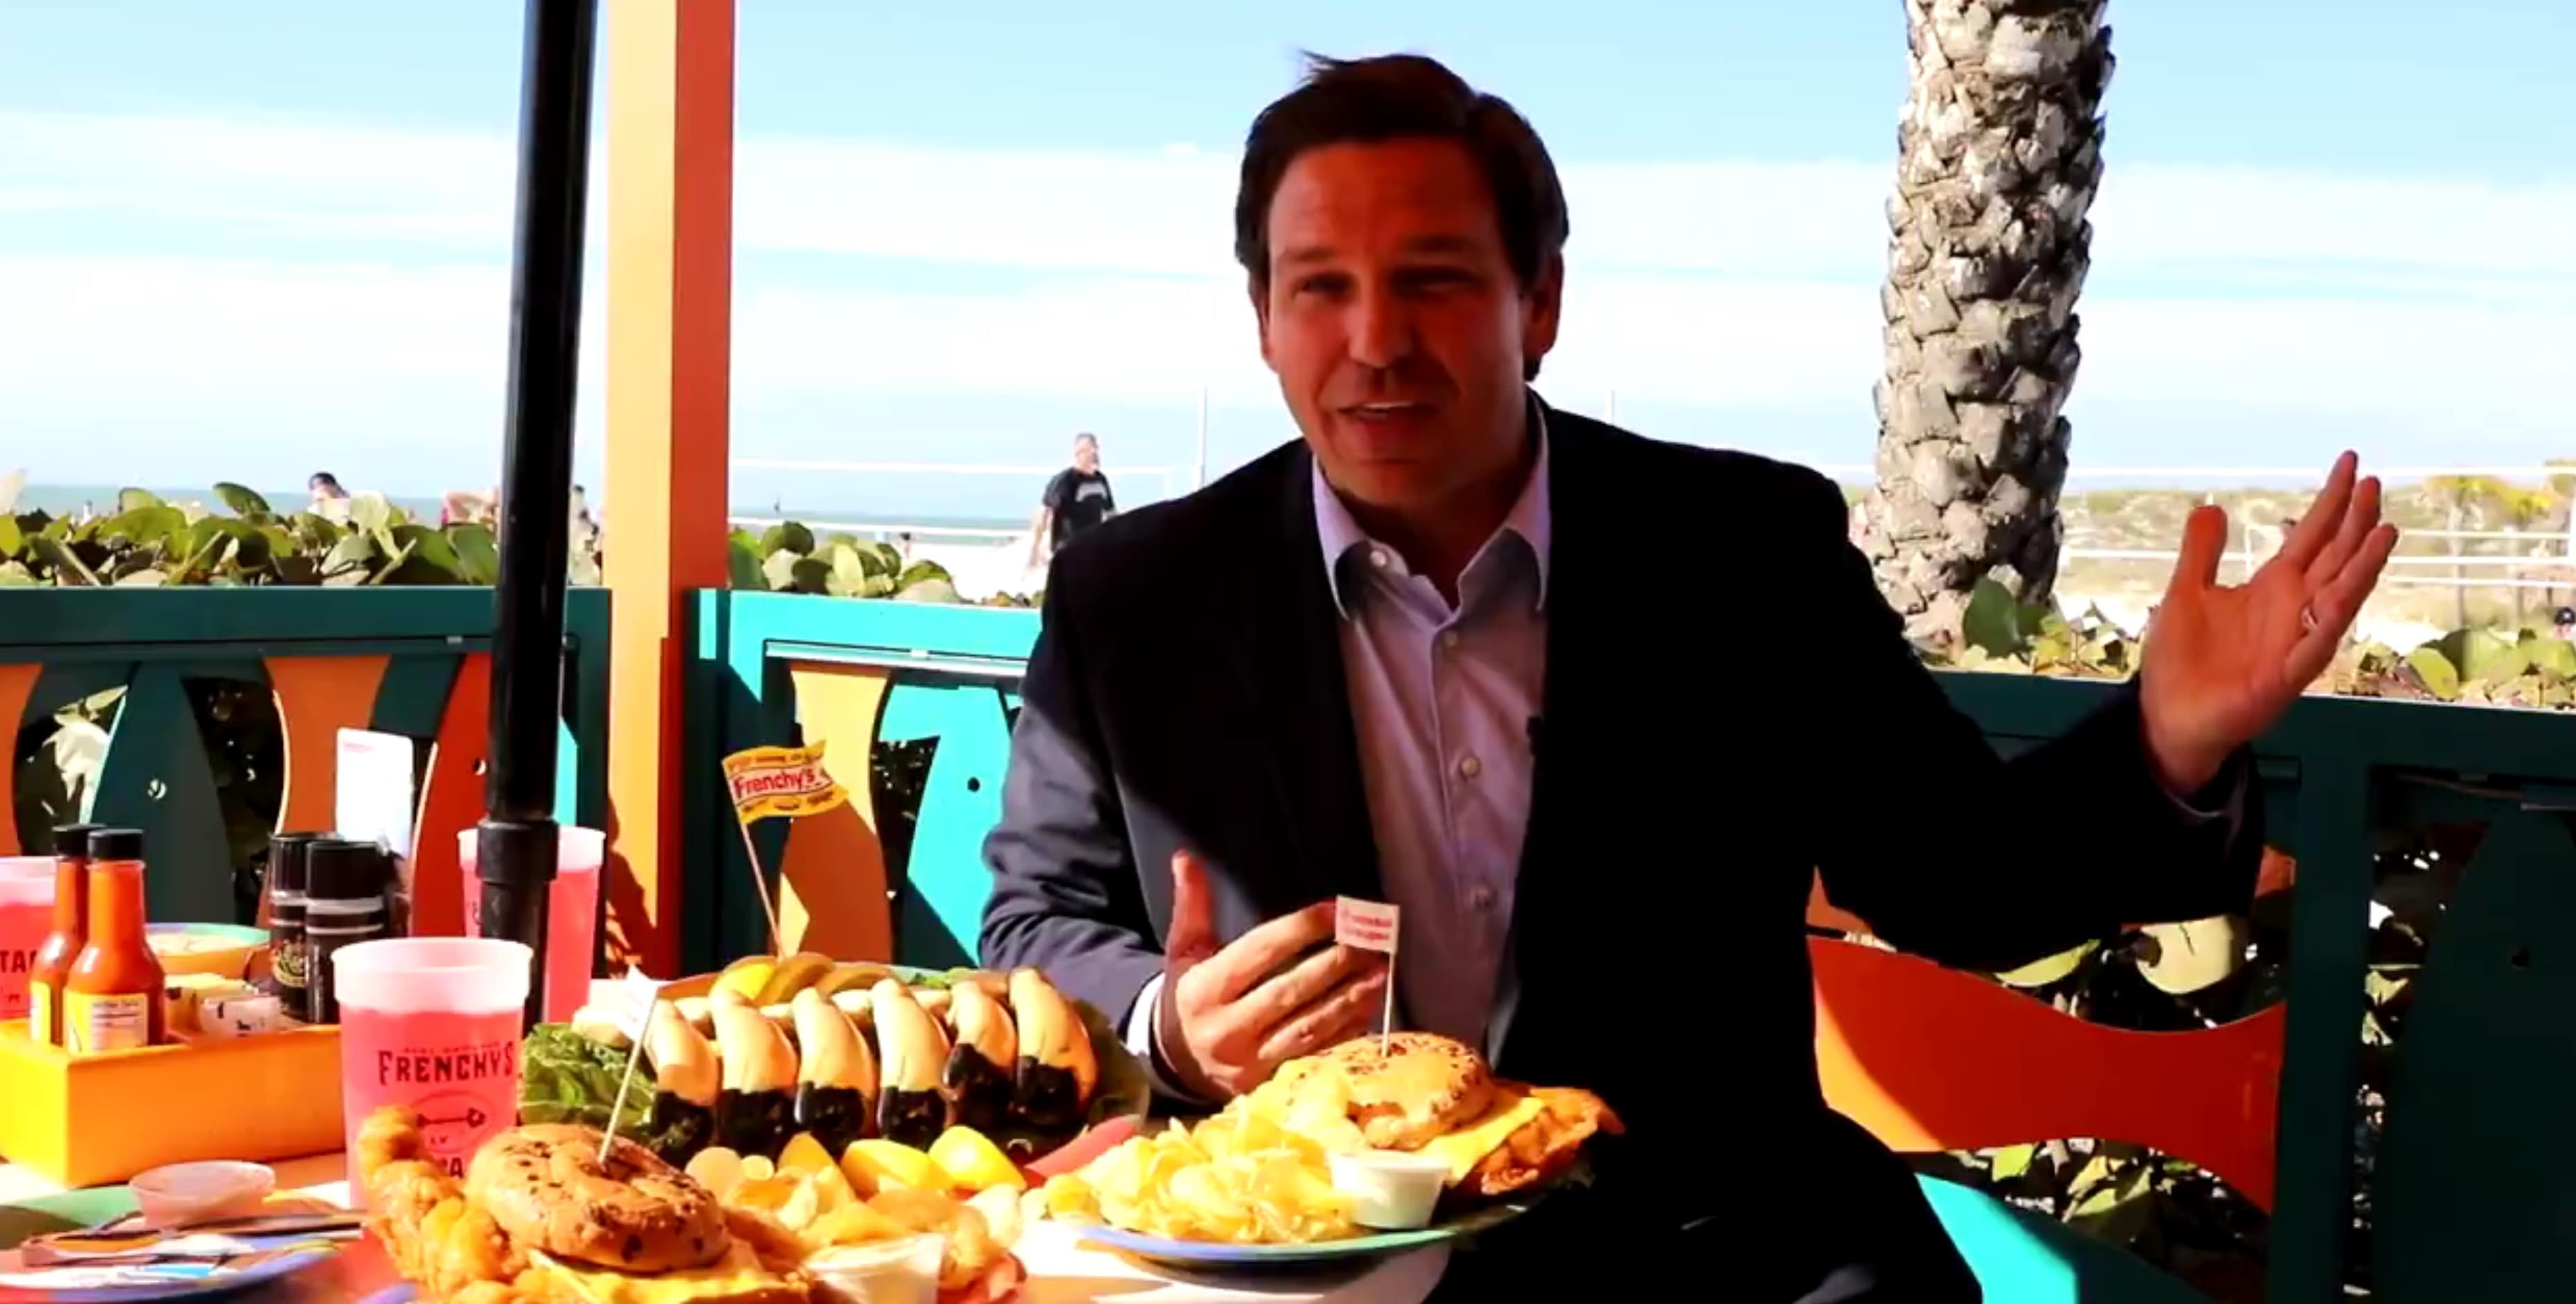 ‘Partisan’ Ron DeSantis bets Frenchy’s stone crab claws and grouper sandwiches on Tampa Bay Buccaneers